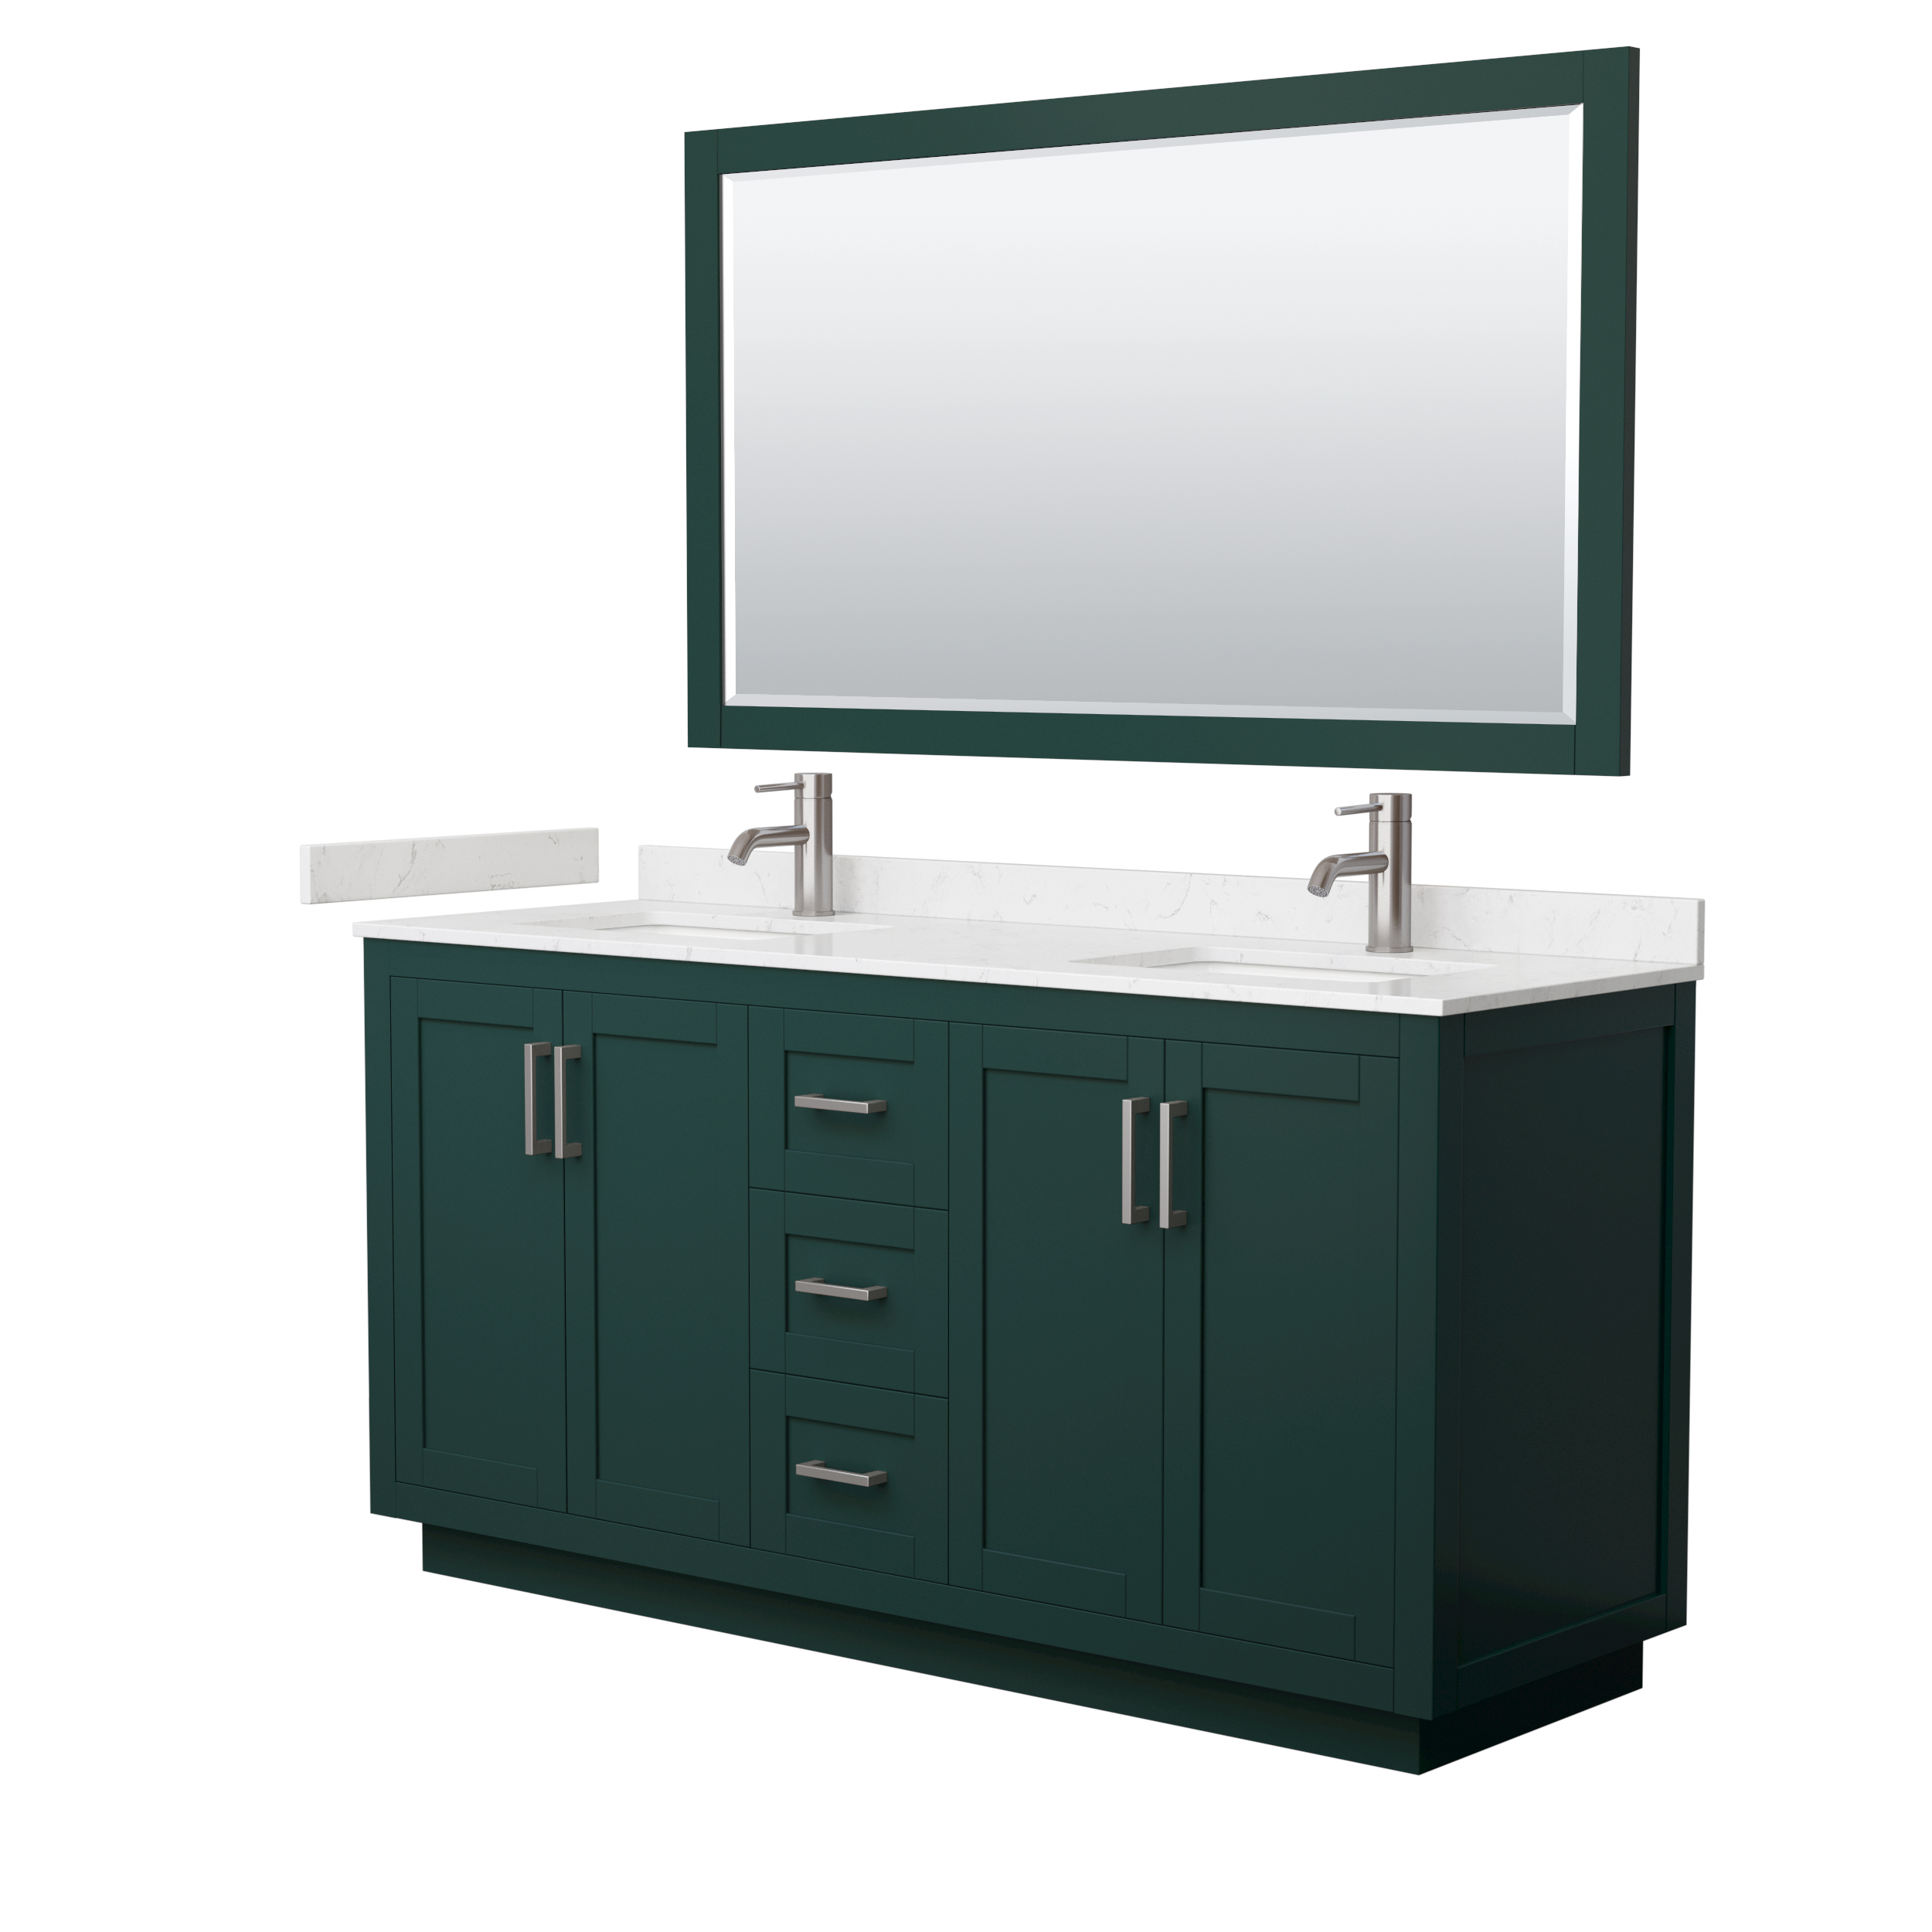 miranda 66" double vanity with optional cultured marble counter - green